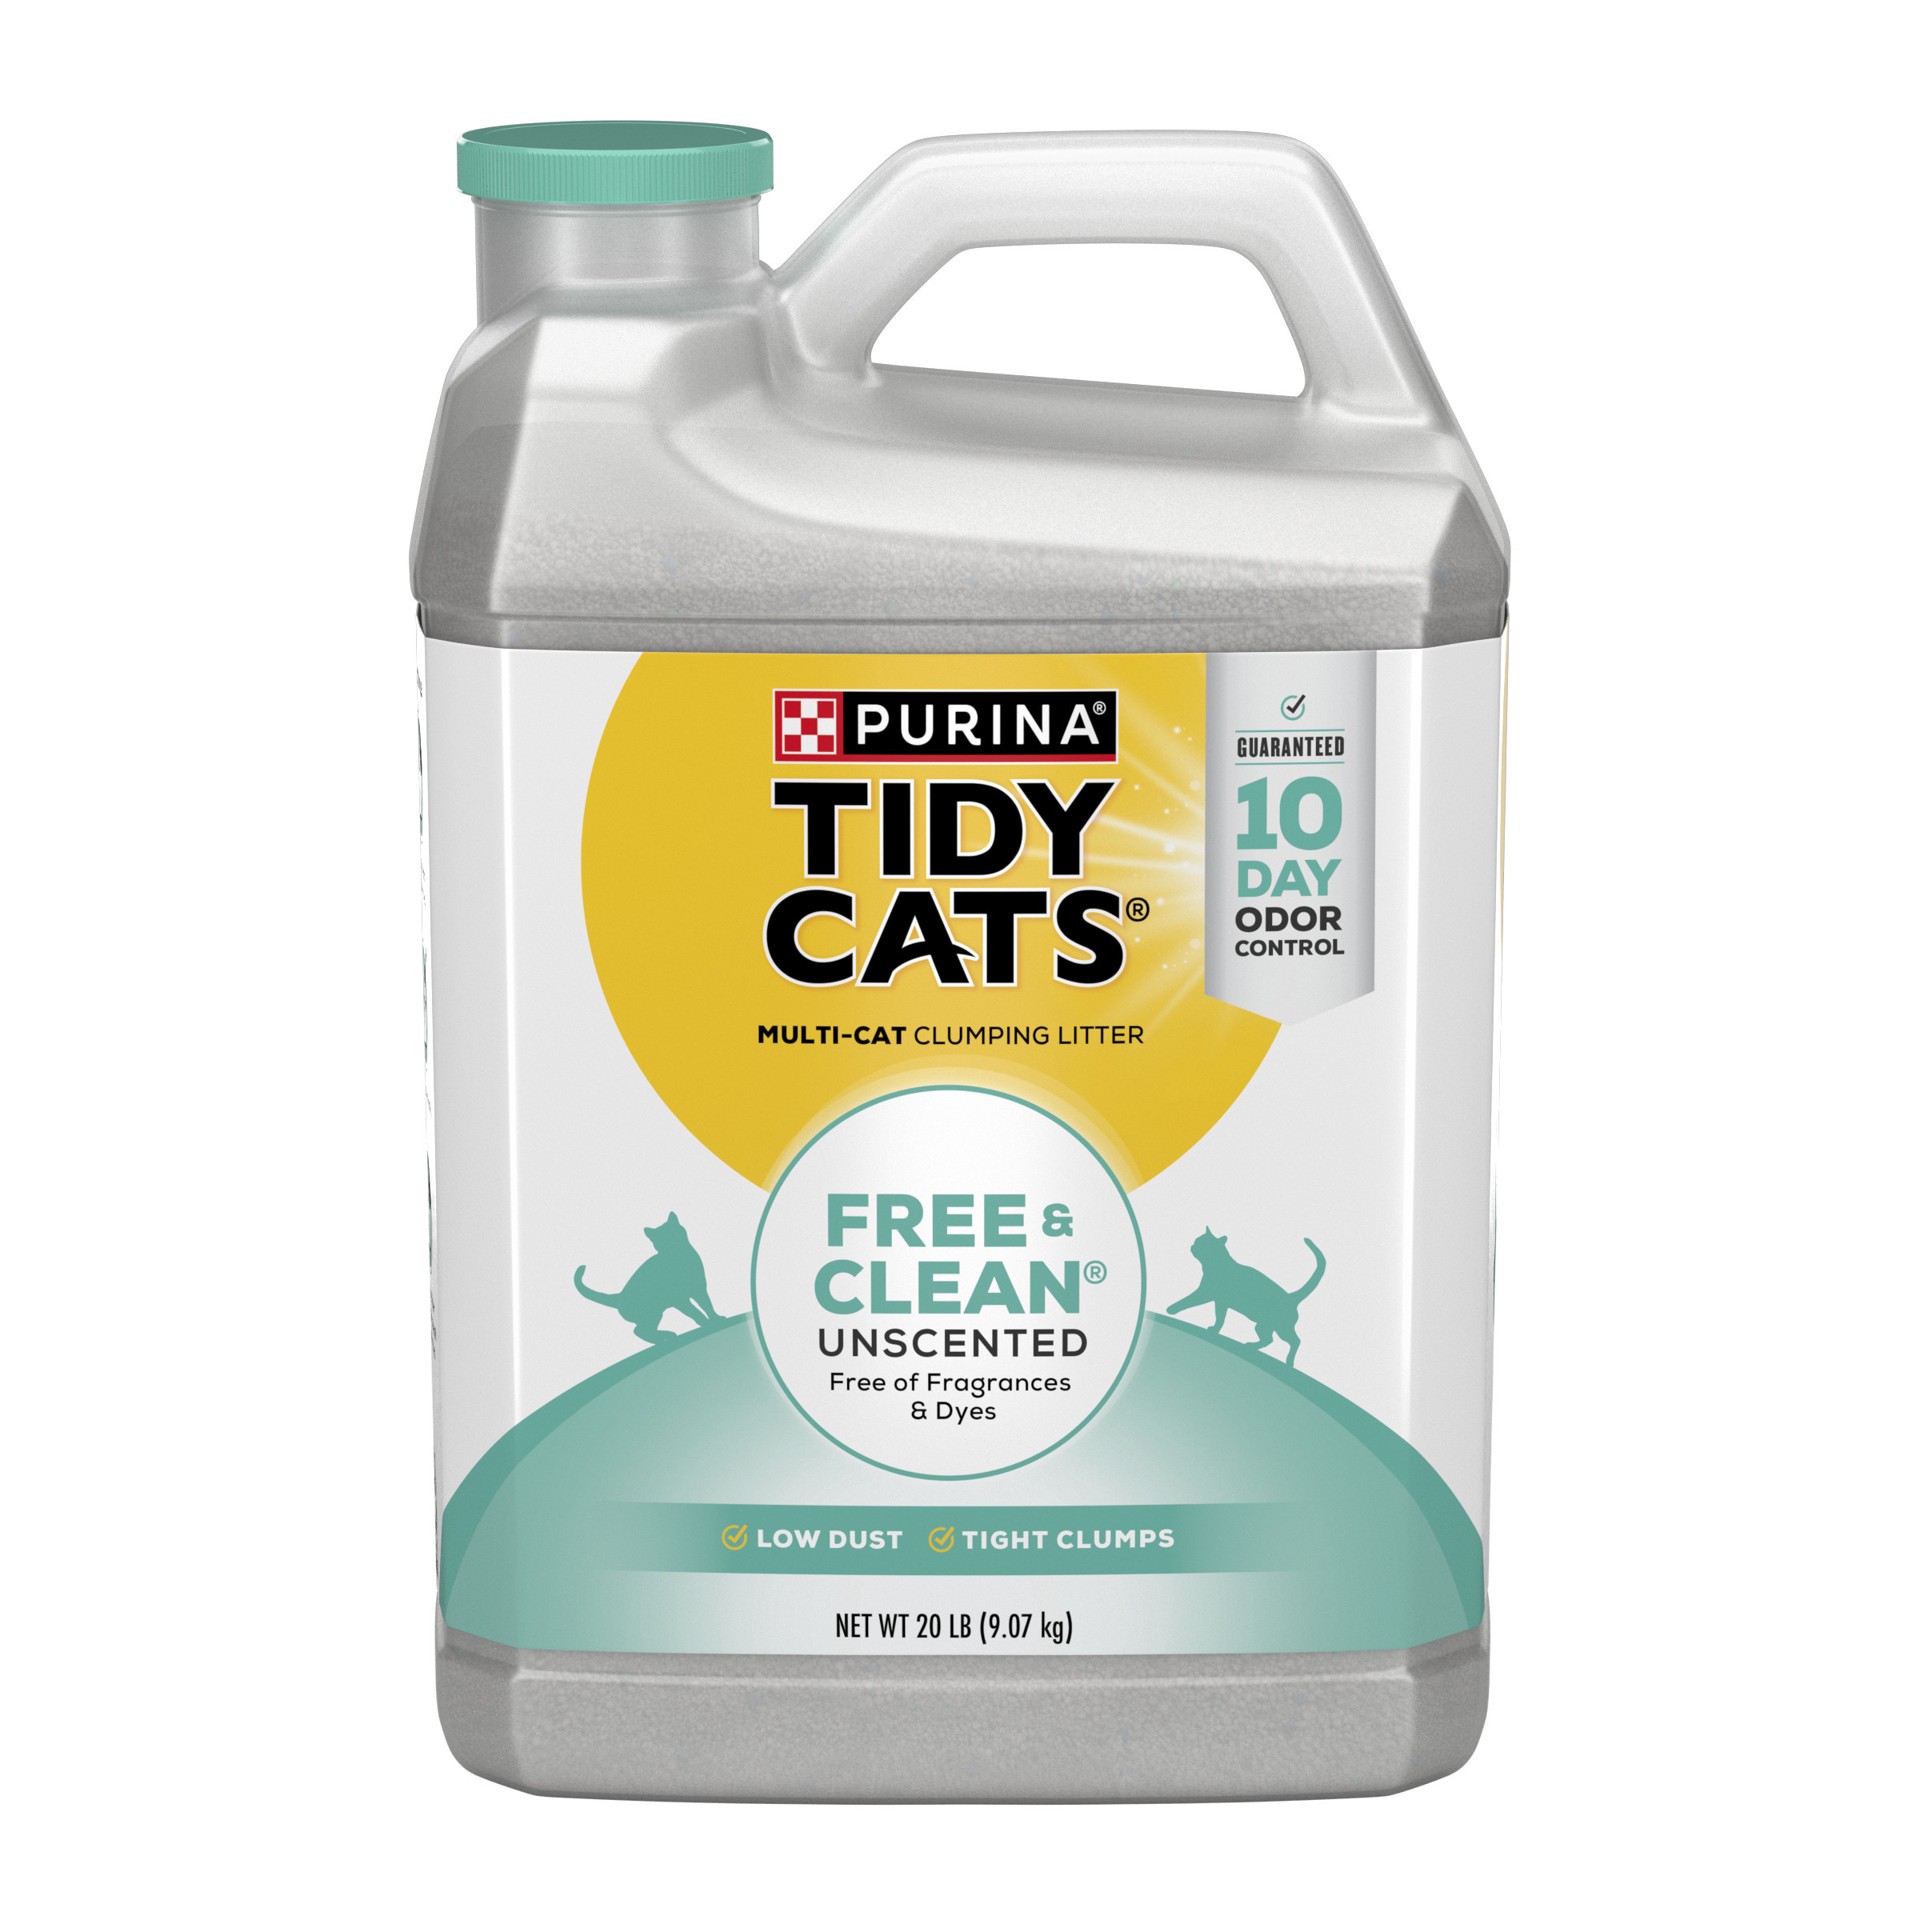 slide 1 of 8, Tidy Cats Purina Tidy Cats Free & Clean Unscented Multi-Cat Clumping Litter - 20lbs, 20 lb